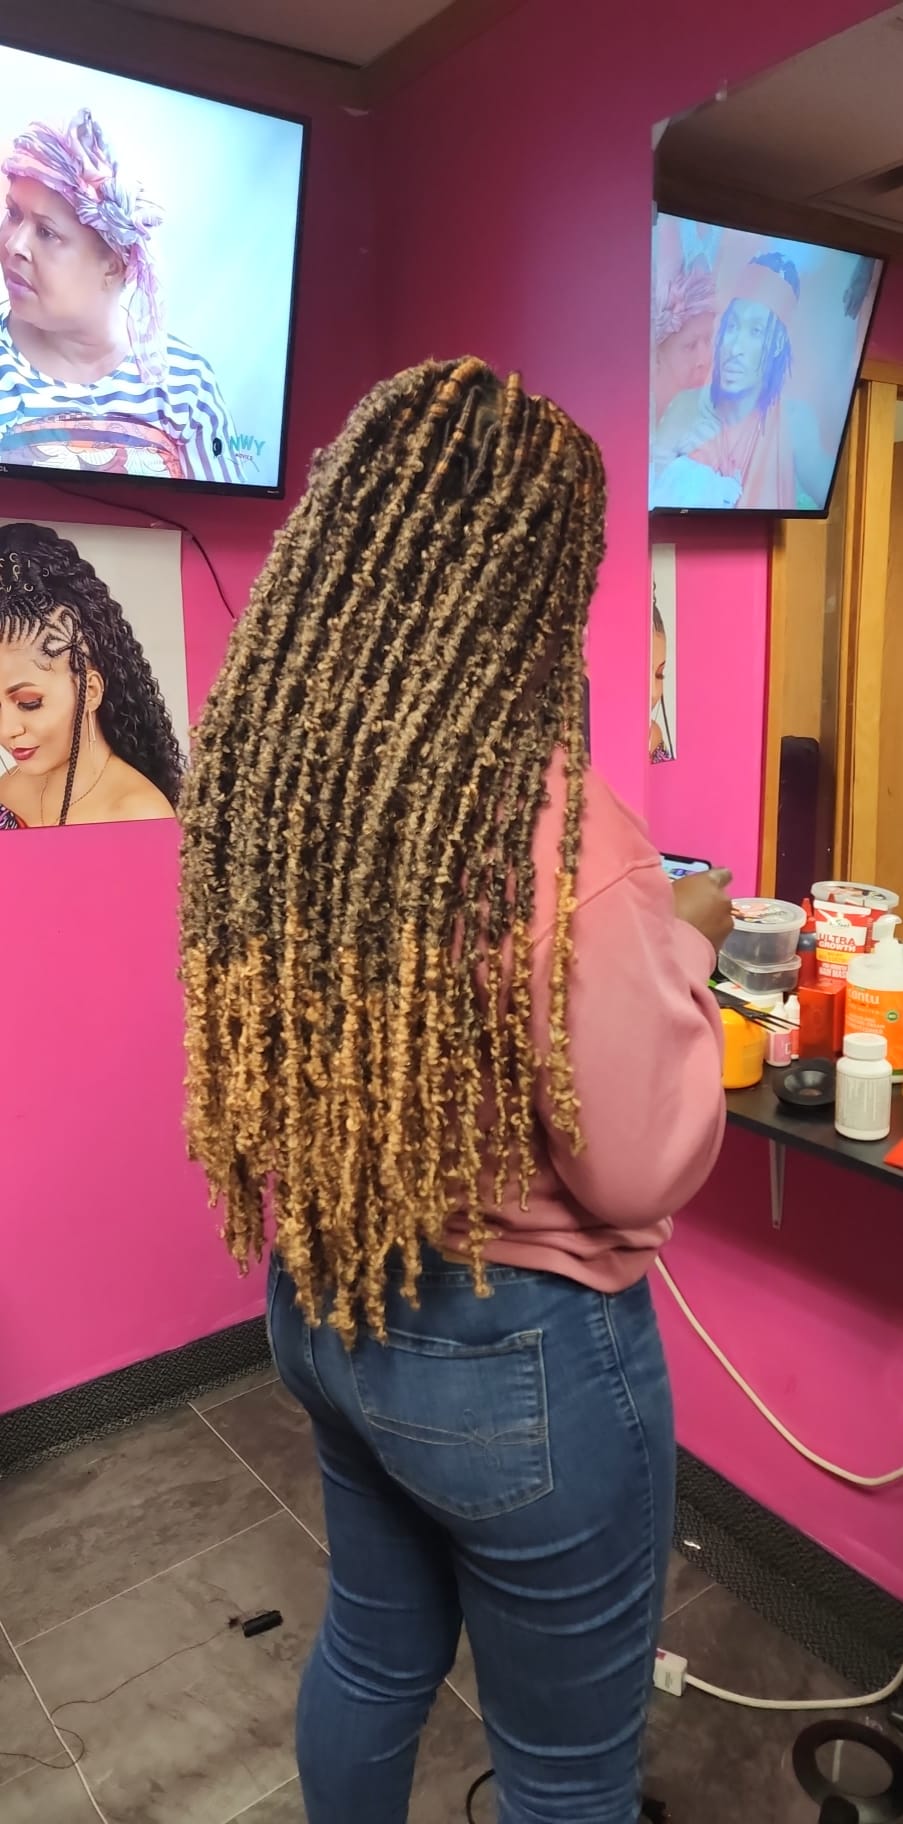 Idaho Will No Longer Criminalize Braiding Hair Without A License